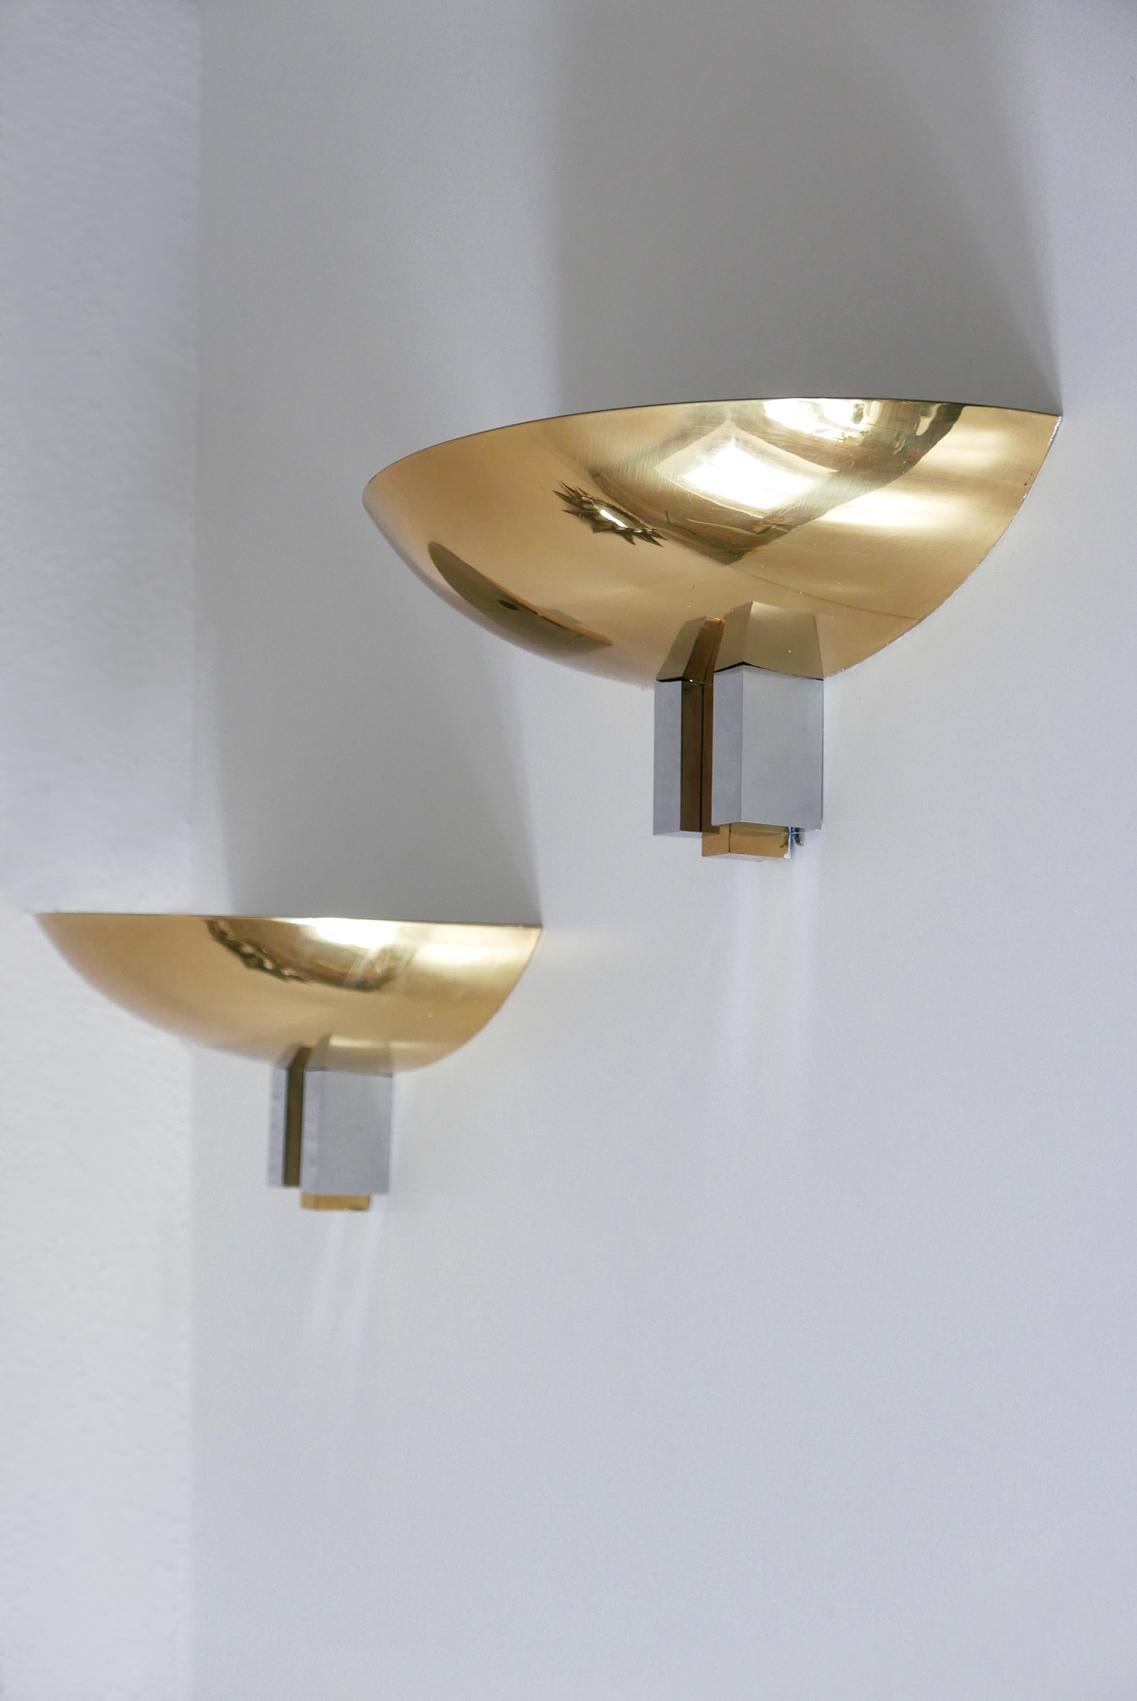 Set of two elegant Mid-Century Modern wall lamps or sconces in Art Deco design. Manufactured by Art-Line Wohndecor, 1980s, Cologne, Germany

Executed in polished brass. Each lamp needs two x E14 Edison screw fit bulbs. They are wired, and run both